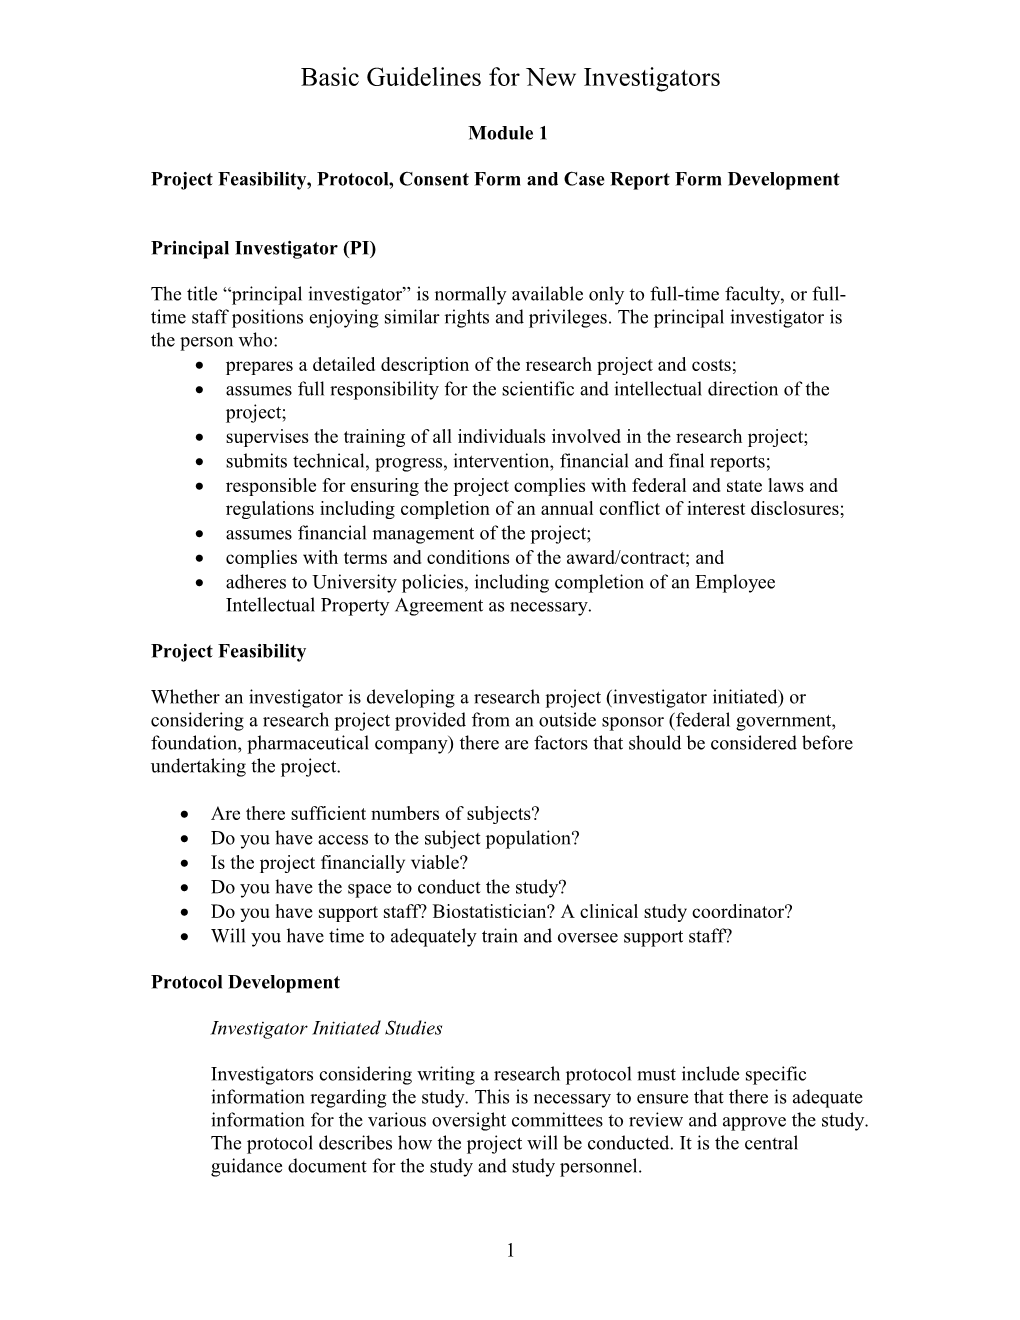 Project Feasibility, Protocol, Consent Form and Case Report Form Development